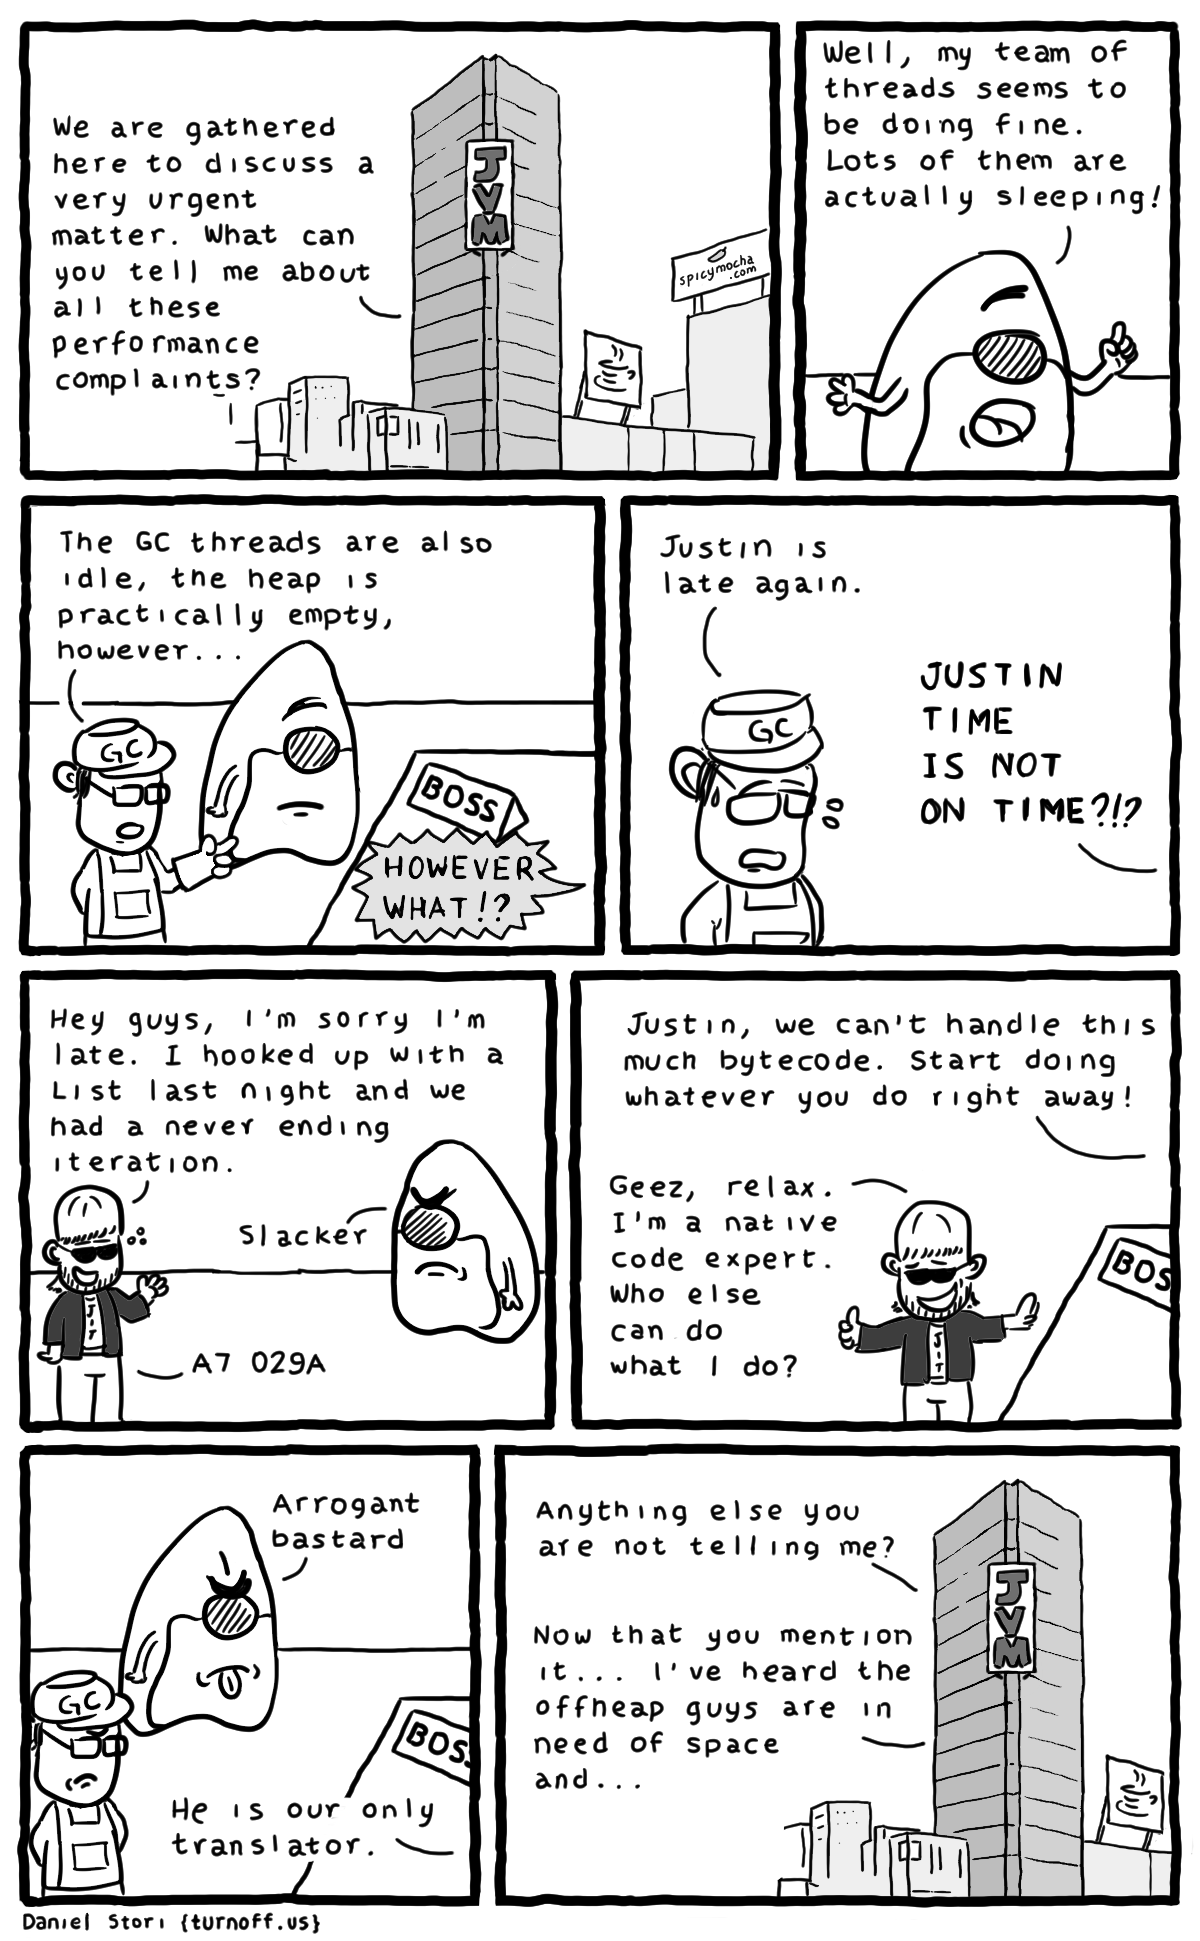 when just-in-time is justin time geek comic